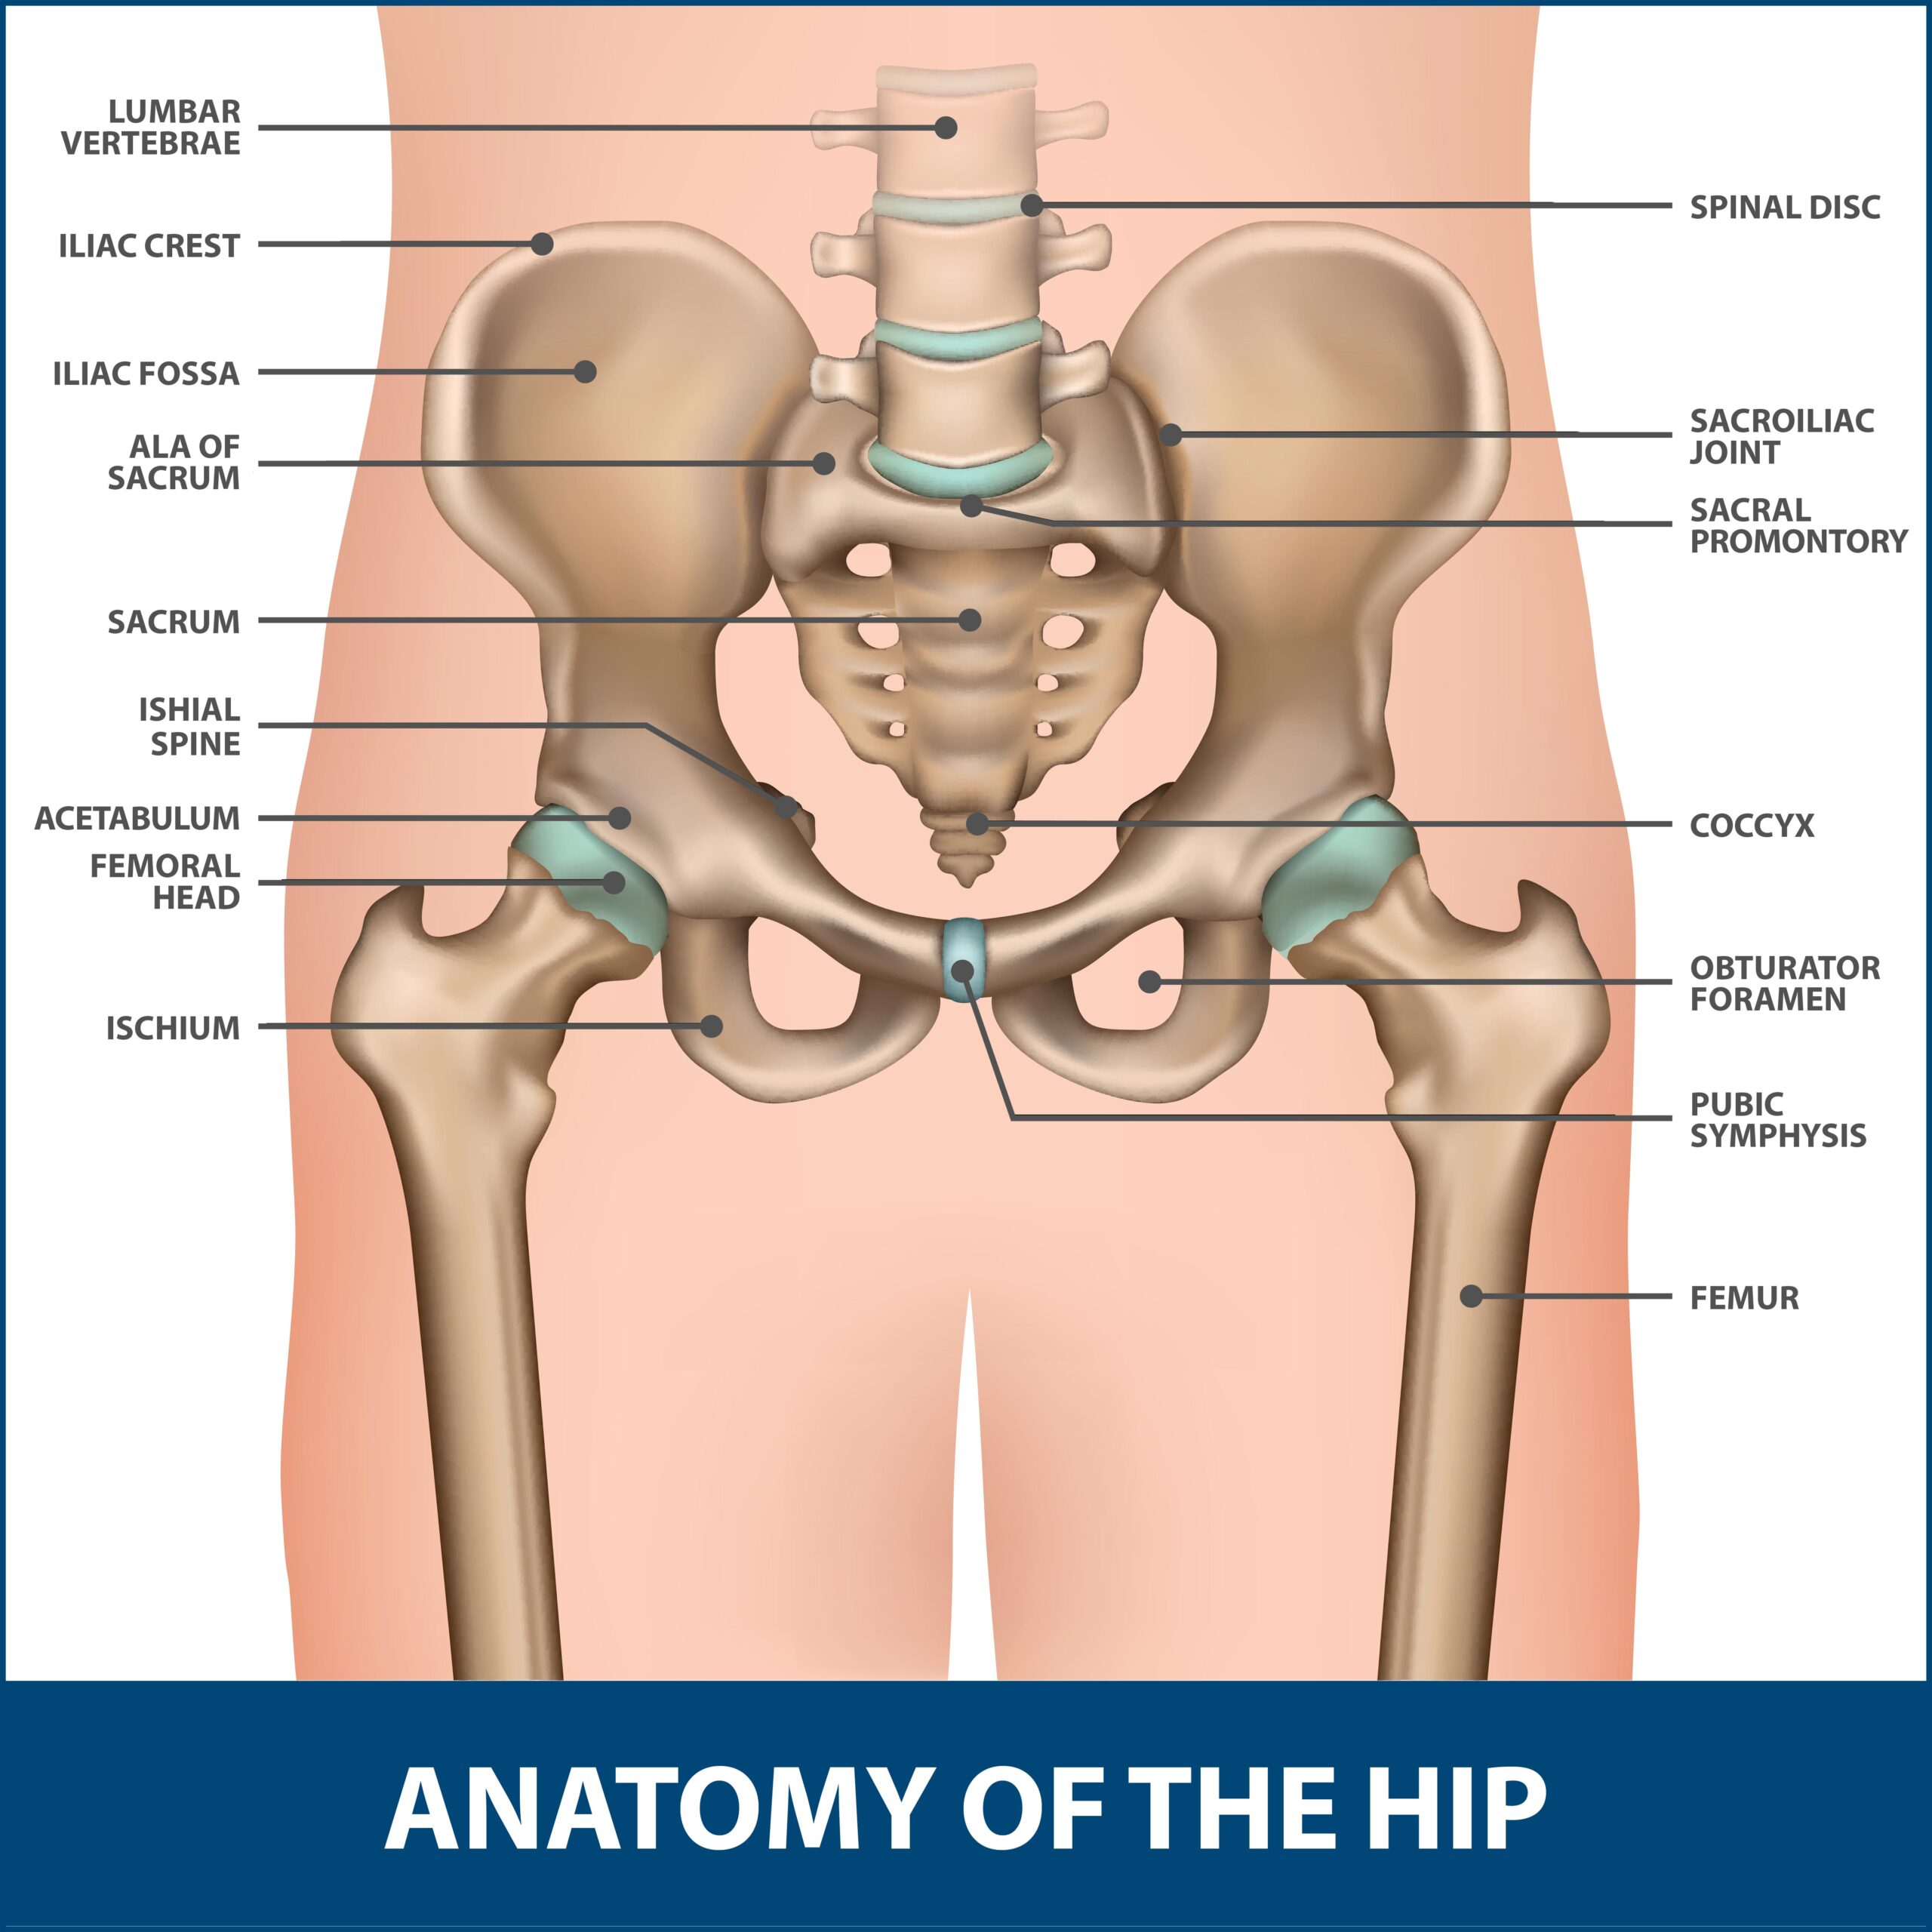 Total Hip Replacement - Anterior Approach